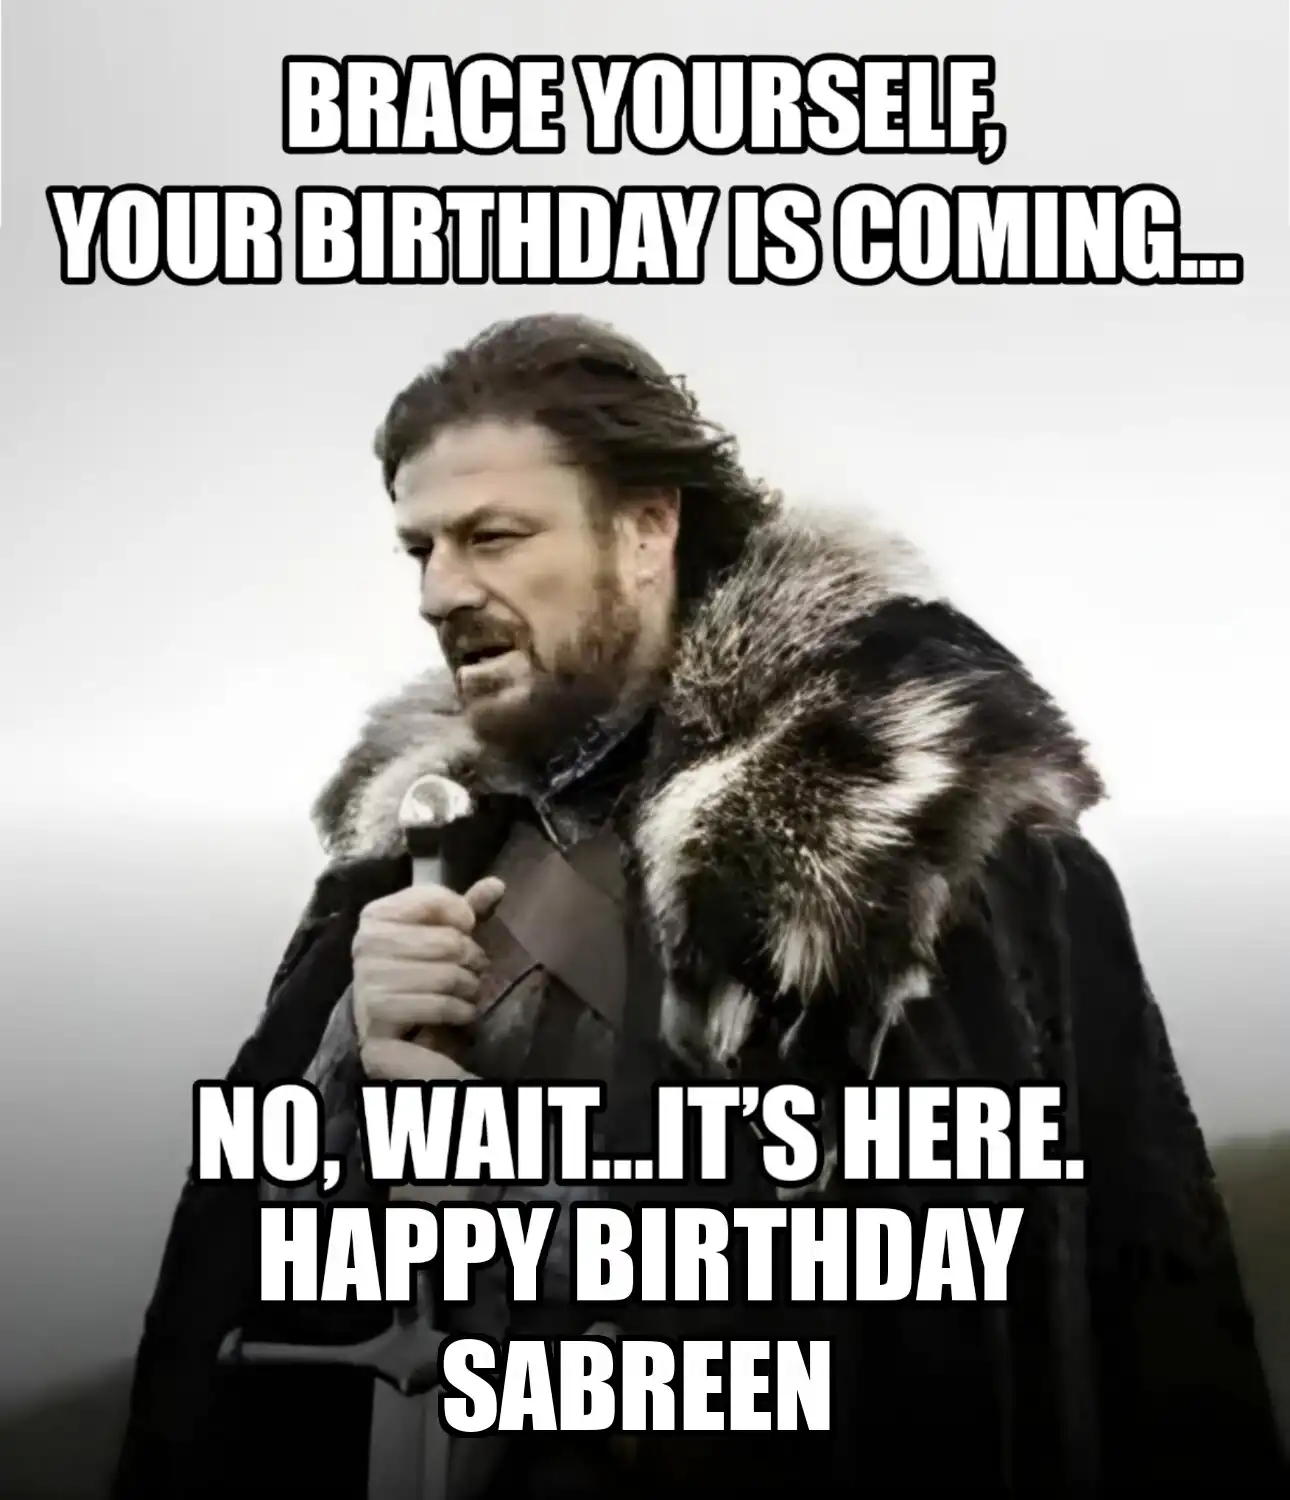 Happy Birthday Sabreen Brace Yourself Your Birthday Is Coming Meme